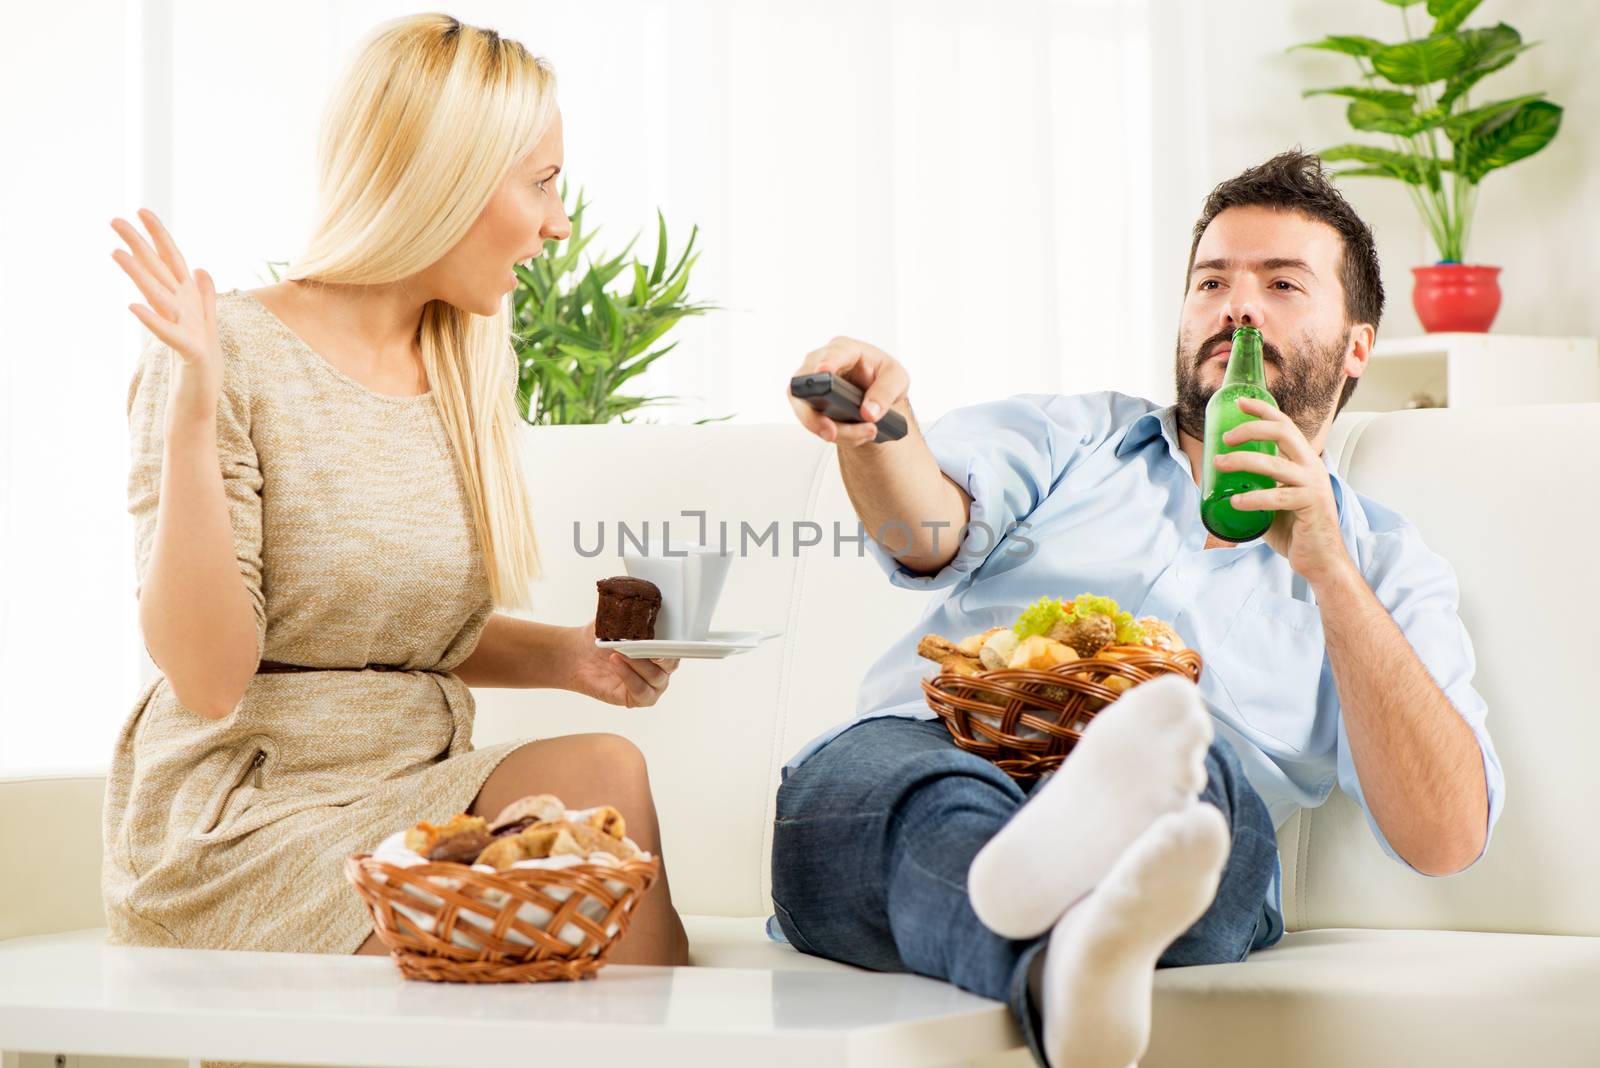 Young man sitting on a couch with his feet on the table, holding a bottle of beer in one hand, remote control in the other hand, in the knee had baskets with pastries, while sitting next to him pretty blonde woman shouting at him.